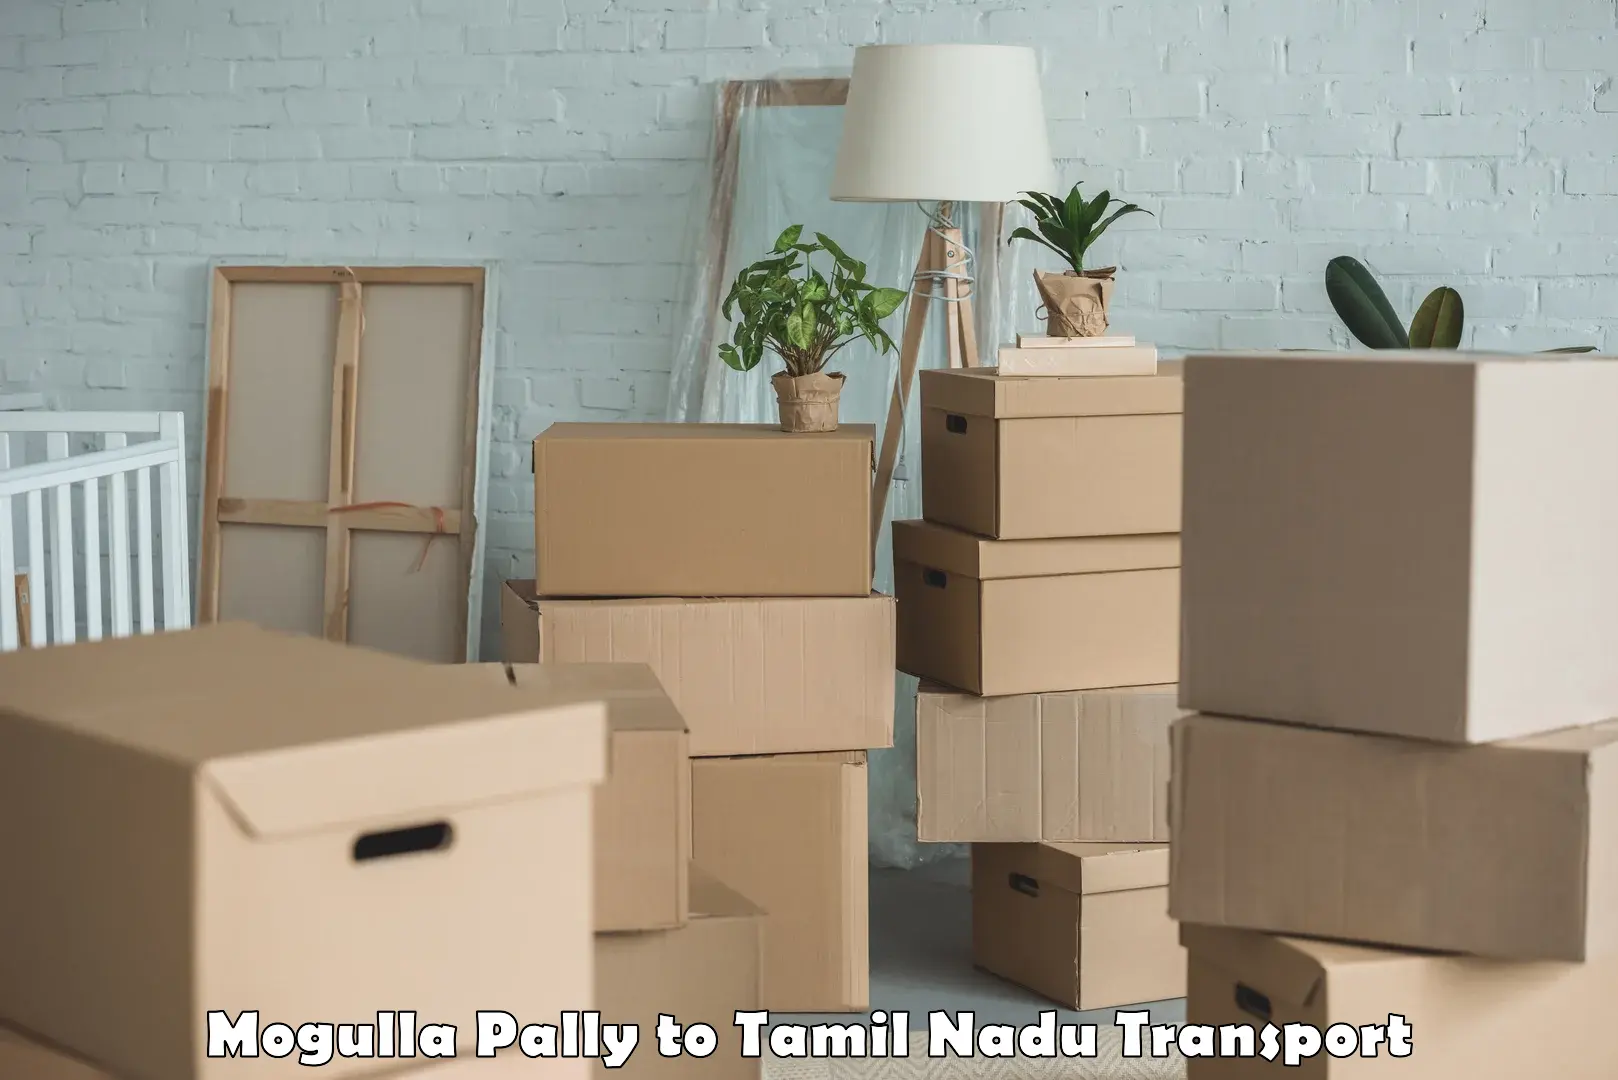 Land transport services in Mogulla Pally to Tamil Nadu